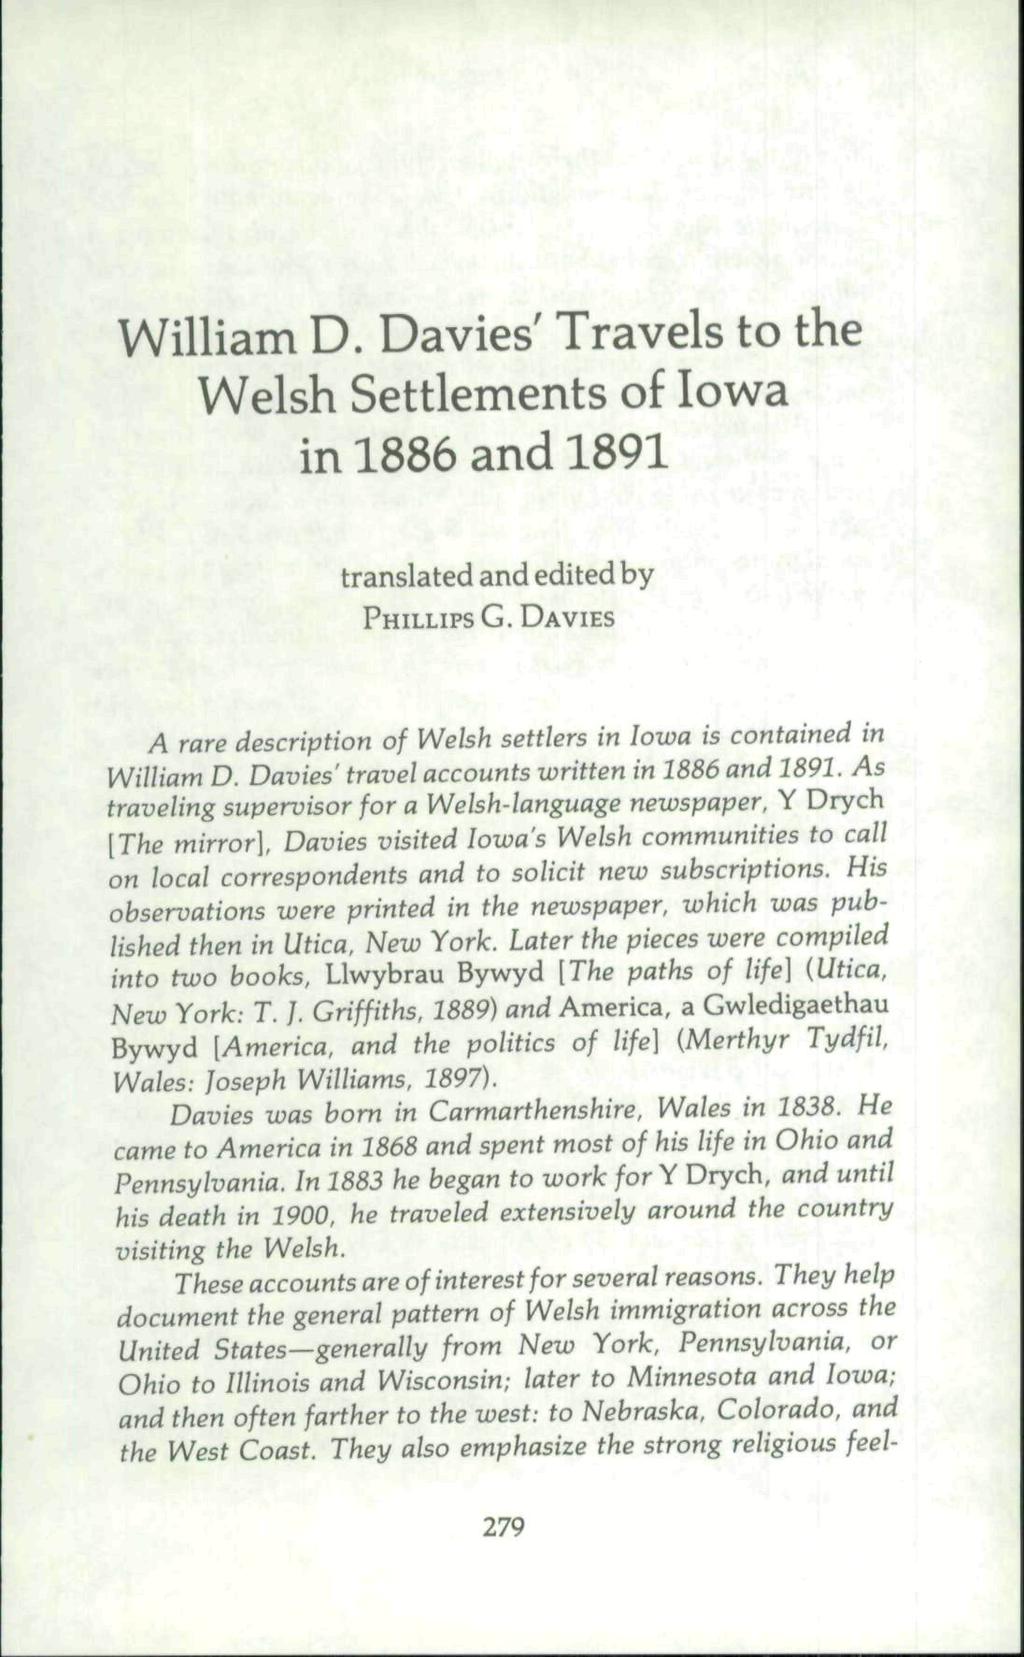 William D. Davies' Travels to the Welsh Settlements of Iowa in 1886 and 1891 translated and edited by PHILLIPS G. DAVIES A rare description of Welsh settlers in Iowa is contained in William D.